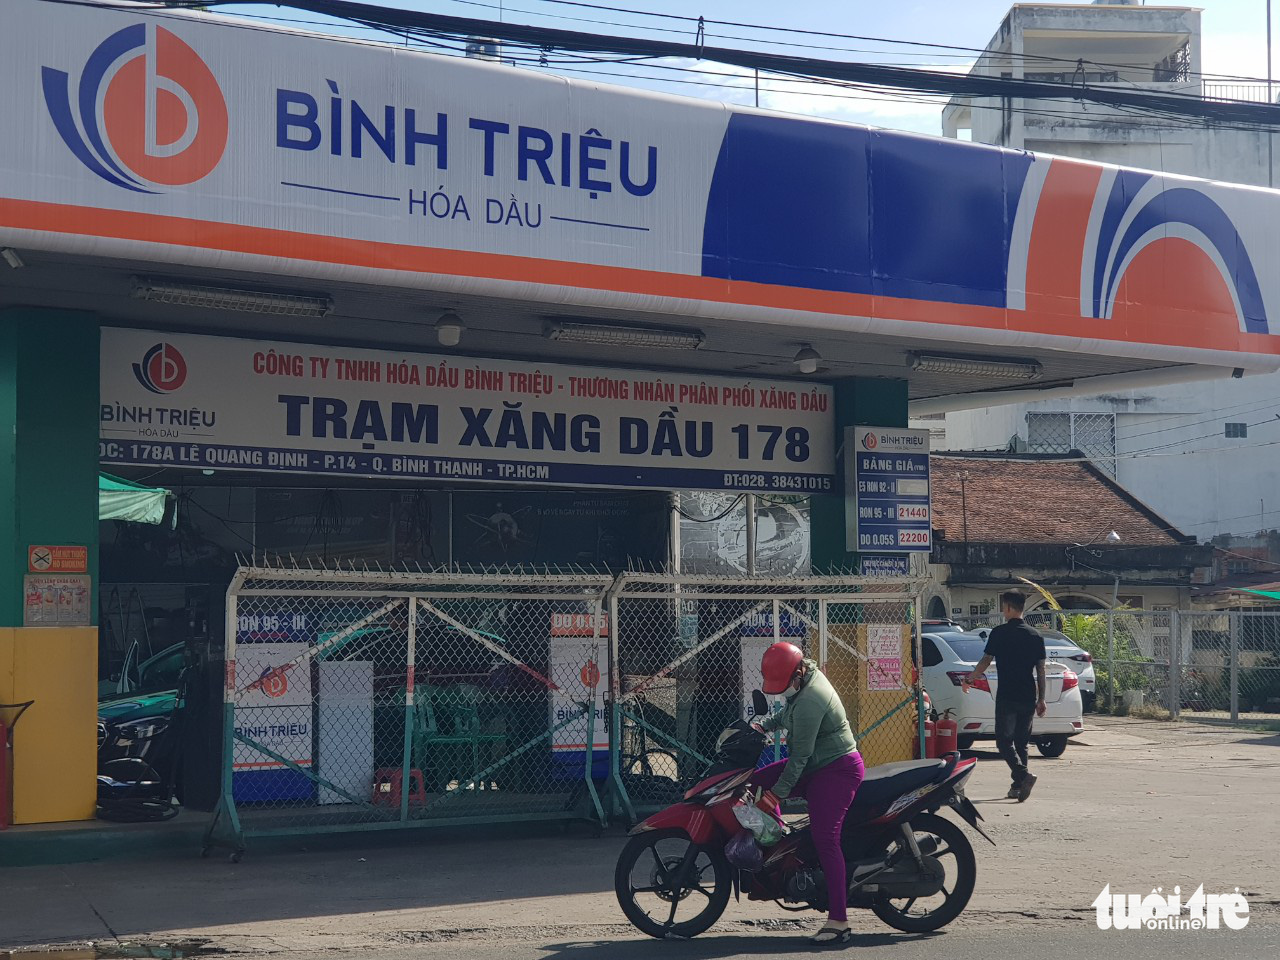 A filling station remains closed on Le Quang Dinh Street in Binh Thanh District, Ho Chi Minh City, October 12, 2022. Photo: Nhat Xuan / Tuoi Tre